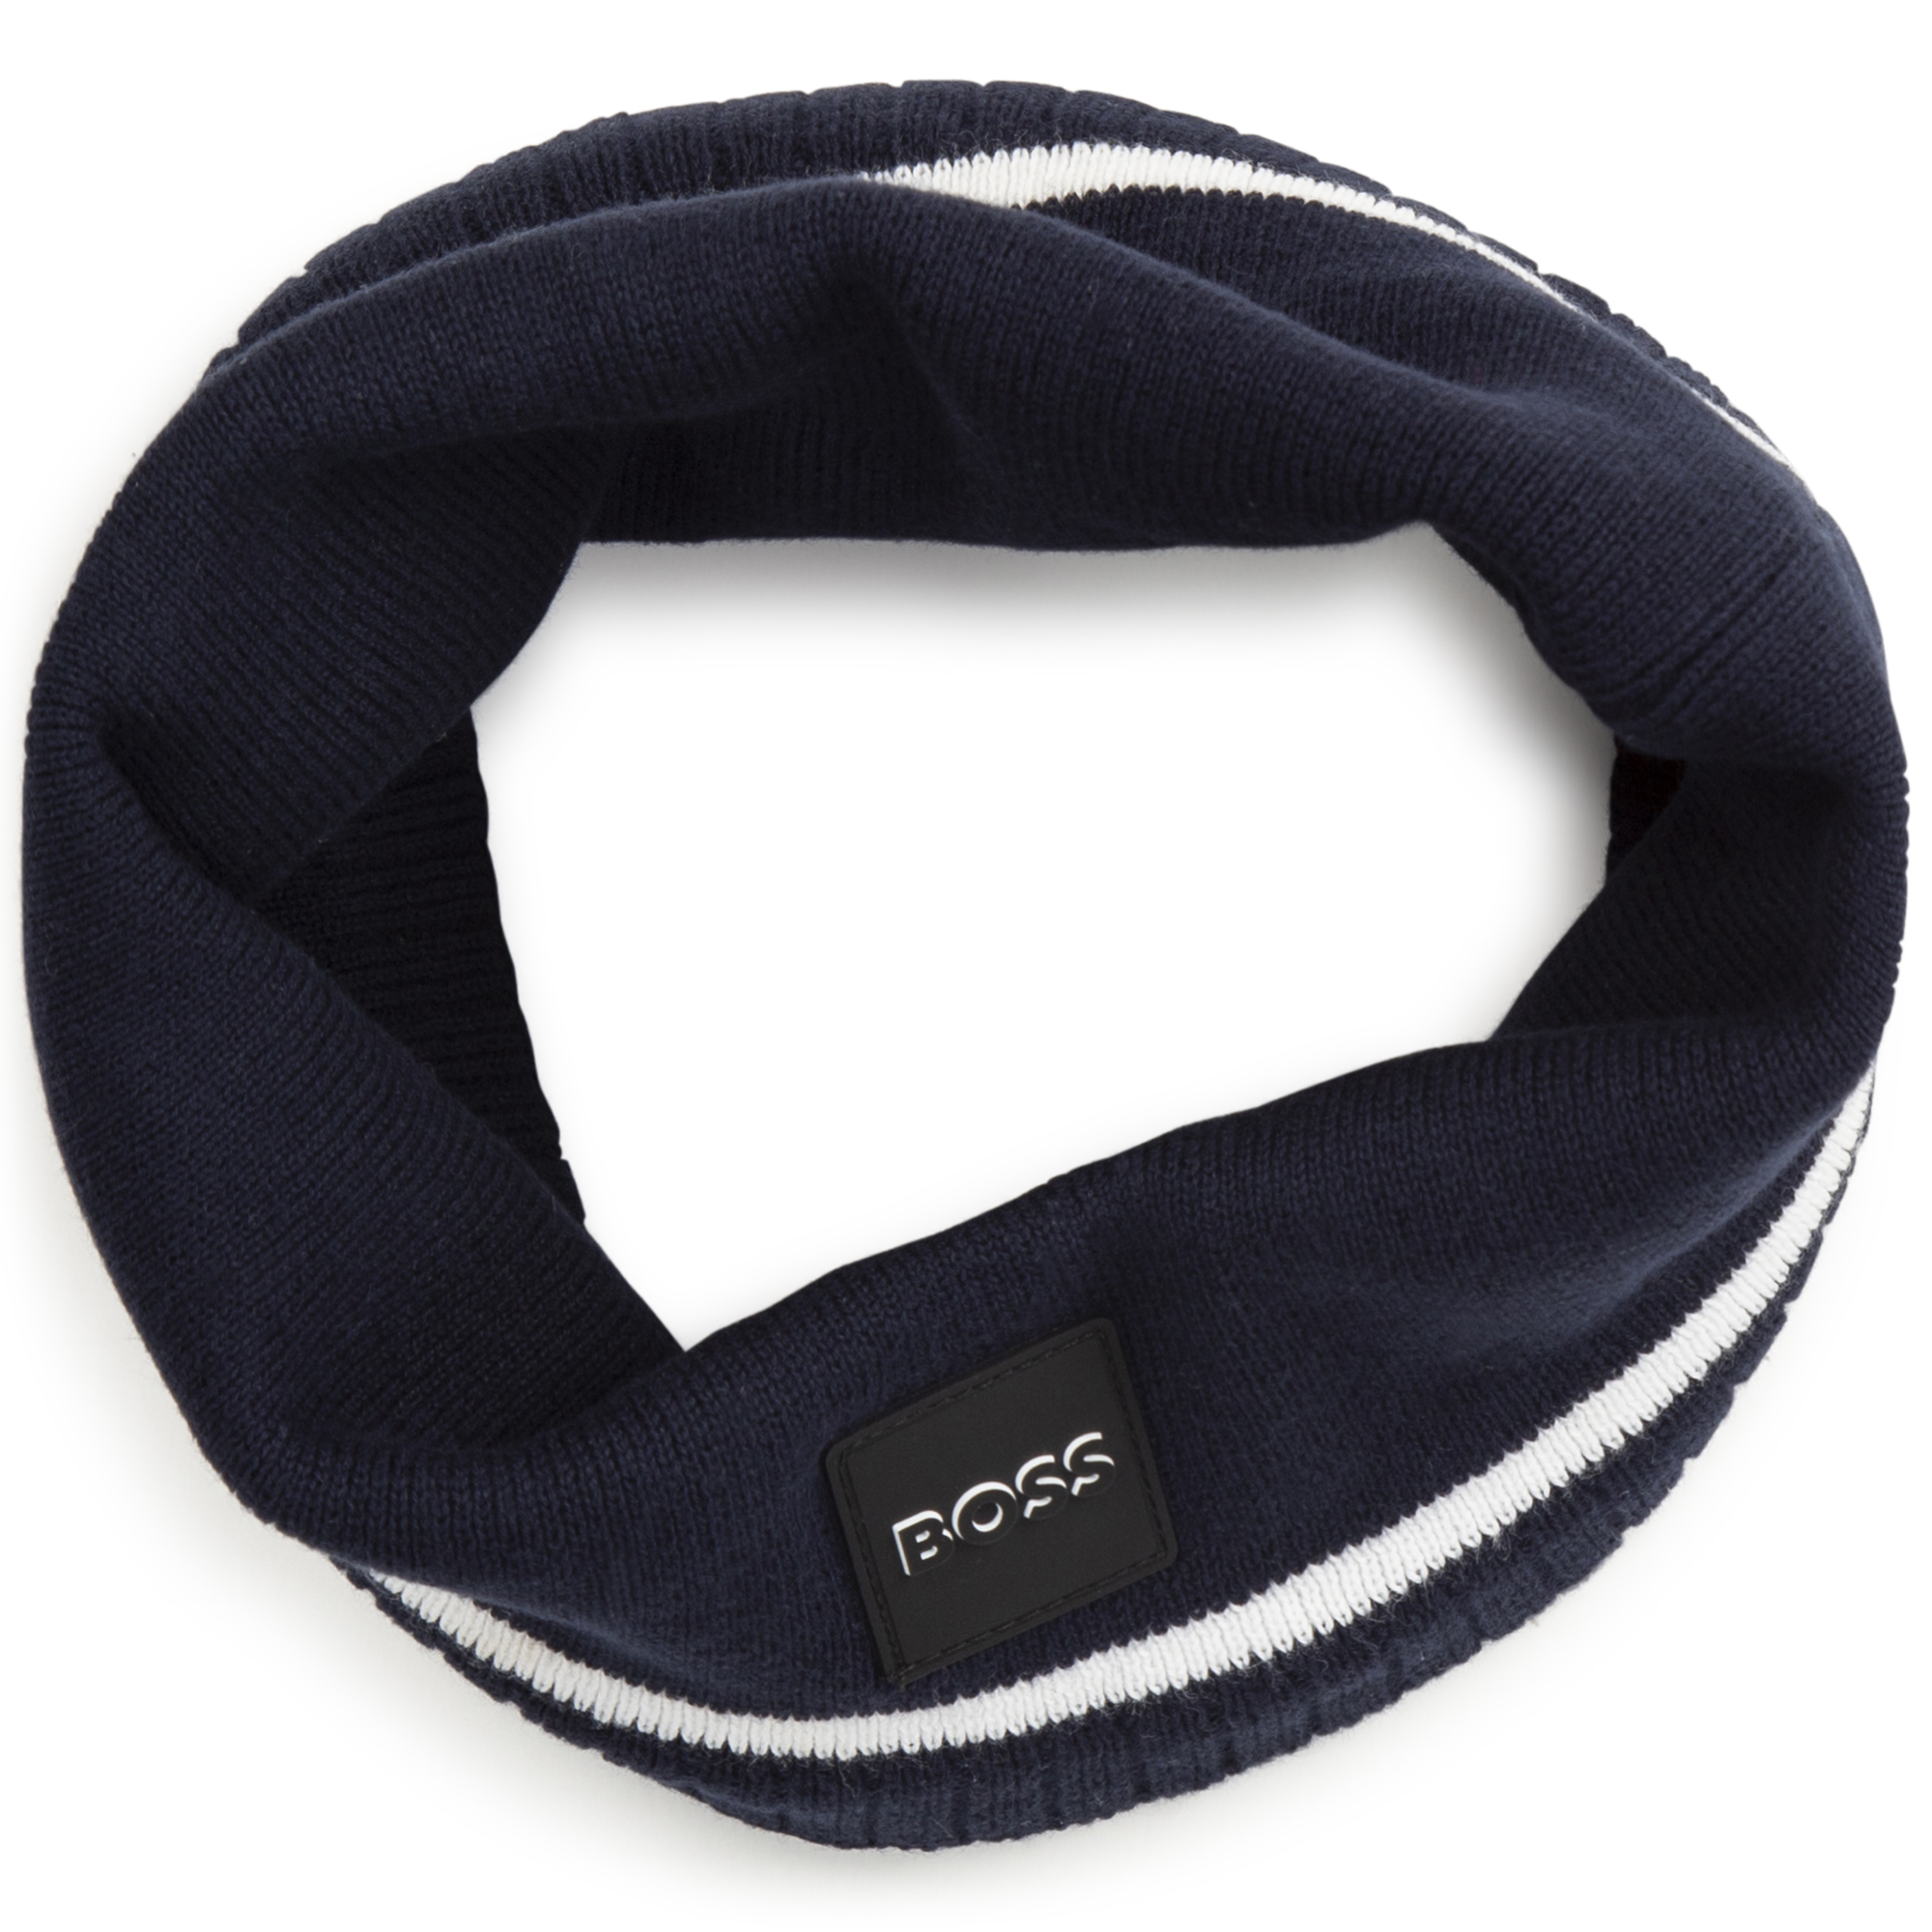 Lined cotton neck warmer BOSS for BOY